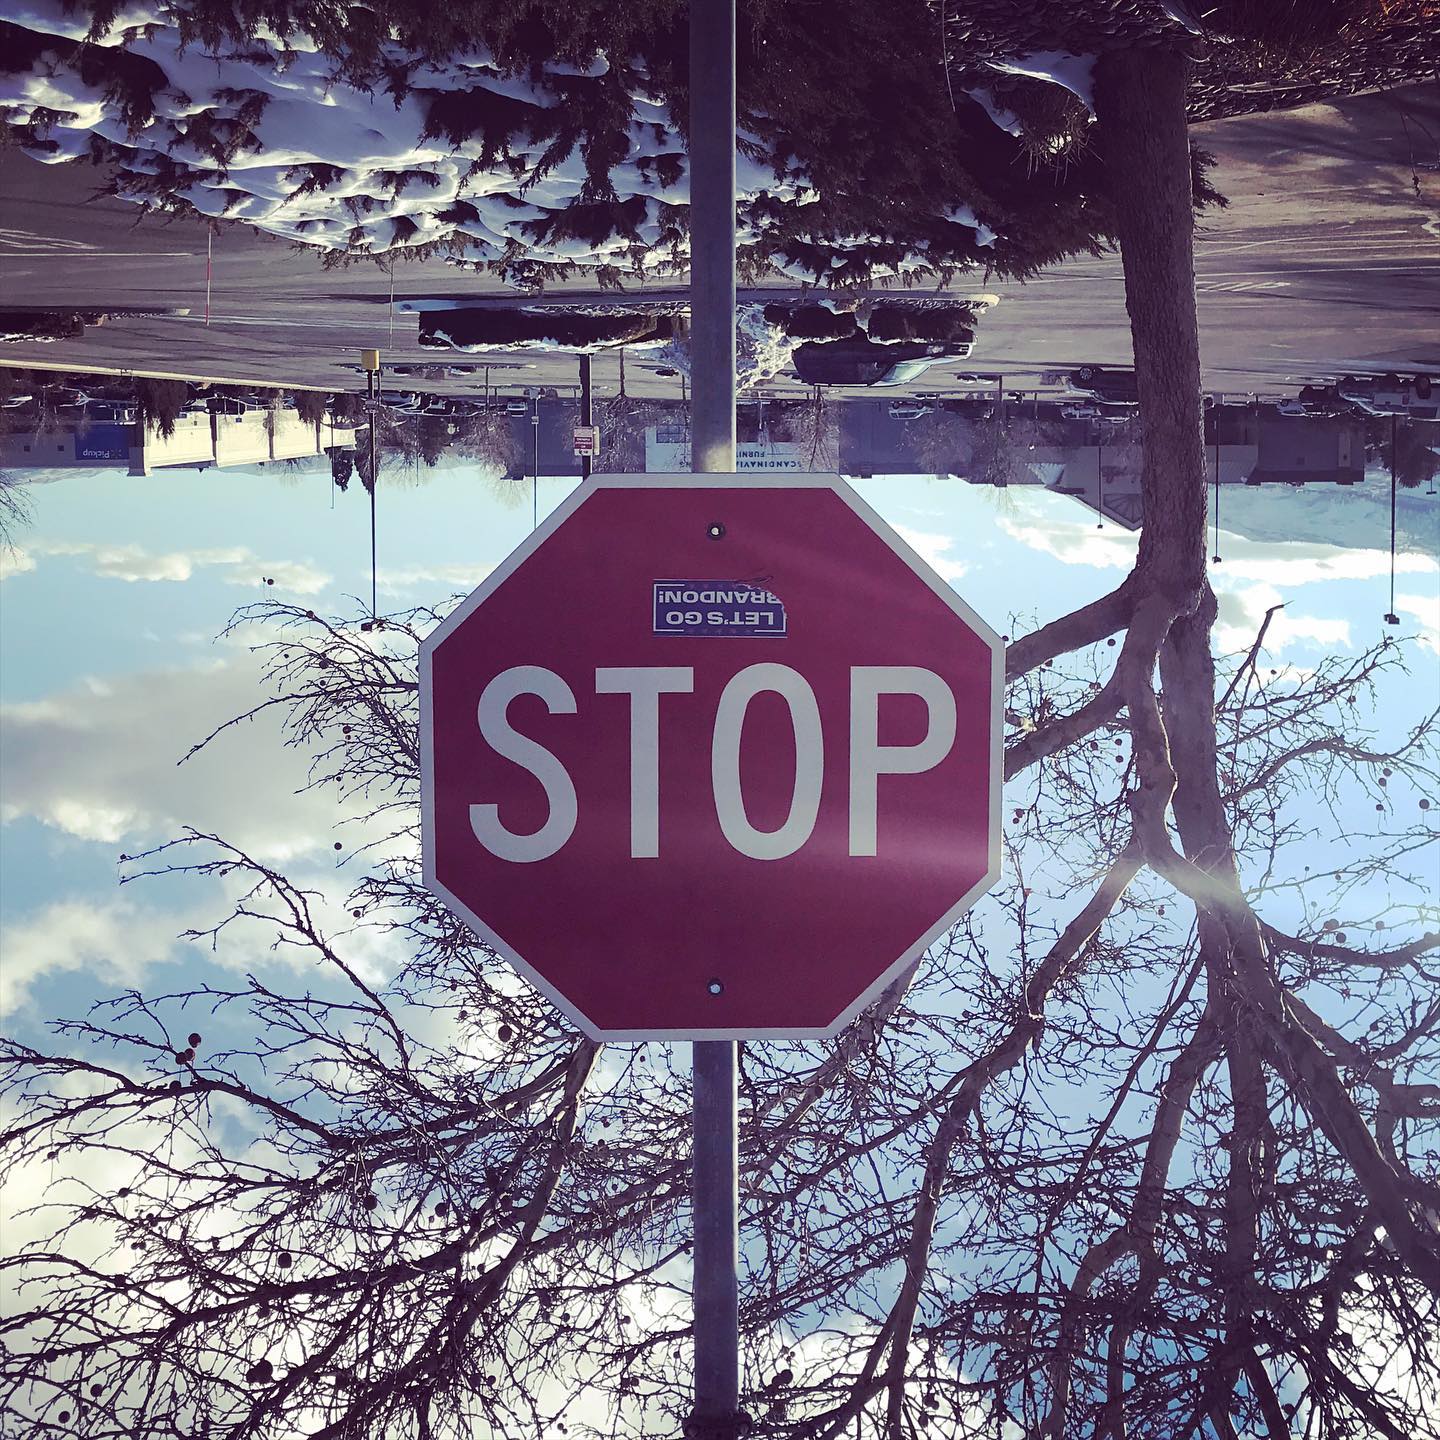 A stop sign hangs upside down at an intersection.